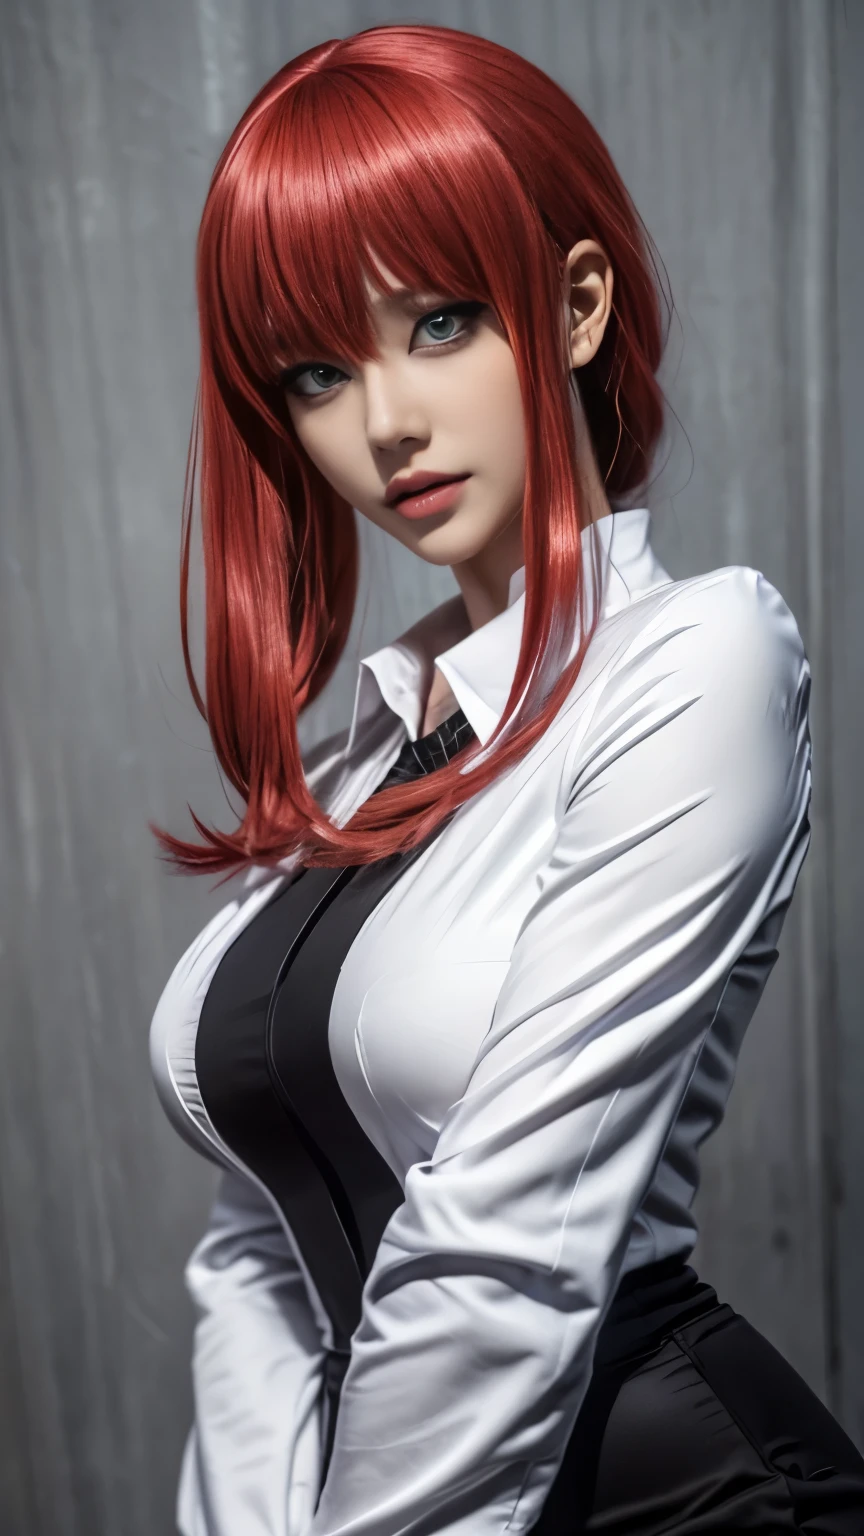 Makima, anime, chainsaw man, ((anime cosplay)), 1 girl, wide range photoshoot, wide range, (milf), beautiful face, clear face, ((hot body)), ((makima dress)), Wearing office suit, ((white full sleeve shirt and full leg black pant)), ((chainsaw man)), ((assassin suit dress)), ((cosplay dress)), ((((Huge breasts: 0.8)))), ((no breasts)), coverd, (((Realistic))), ((well dressed)), waist curve pose, front side, (8k, RAW photo, top quality, masterpiece), (Realistic, photorealistic: 1.9), ((Full body shot)), stylish pose, ((Highly detailed skin: 1.2)), ((Realistic: 1.9)), Photos, masterpieces, top quality, (beautiful blue eyes, gorgeous pale grey black curly hair, white skin, thick body, lower abdomen bristles, perfect slim figure), various poses, ultra-detailed face, detailed eyes, a lot of people are looking at her with excitement, (((no close-up)))